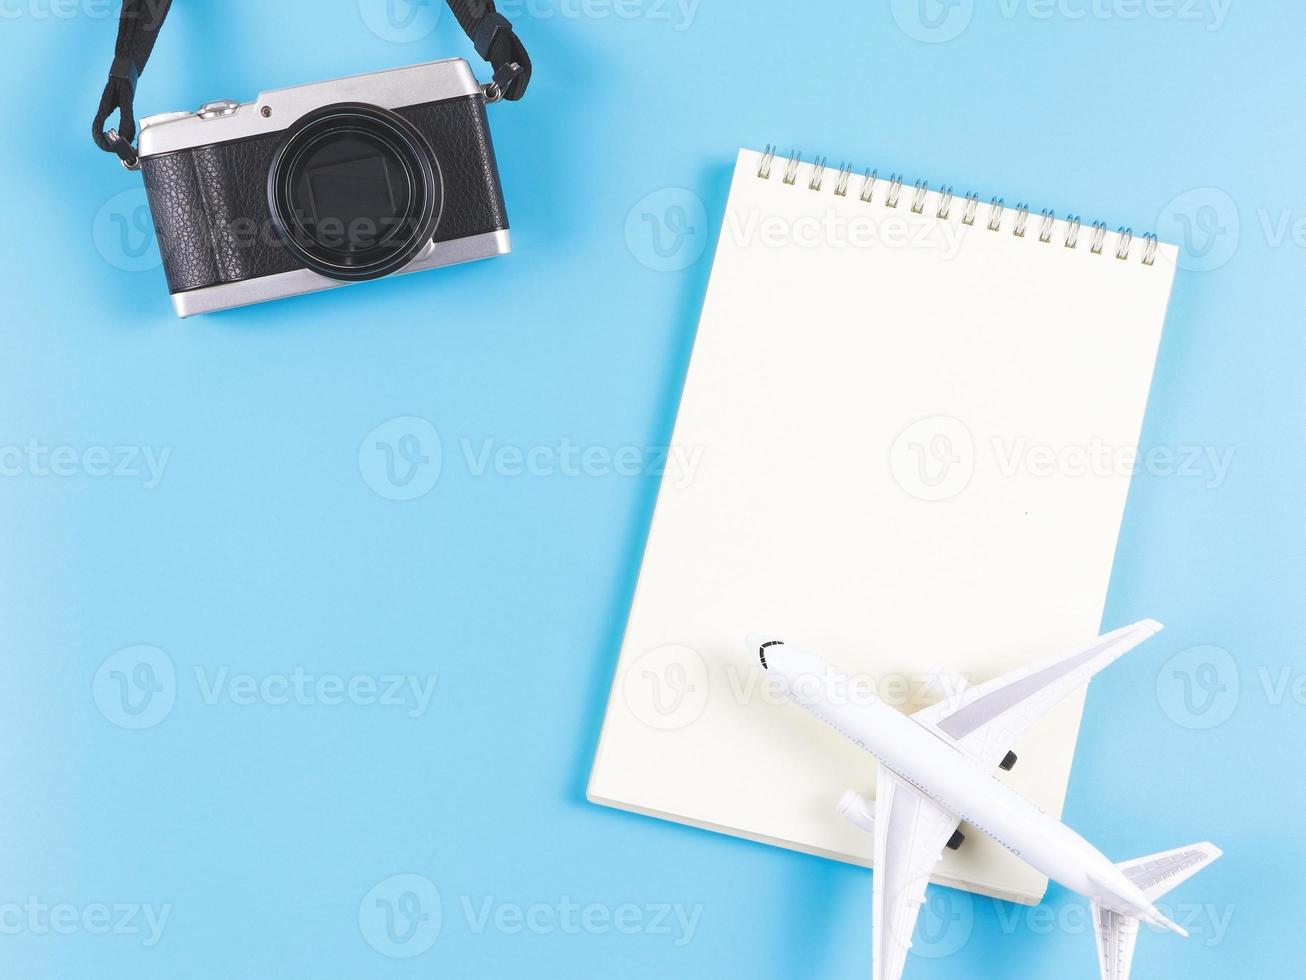 flat lay of blank page opened notebook, airplane model and camera on blue background. photo